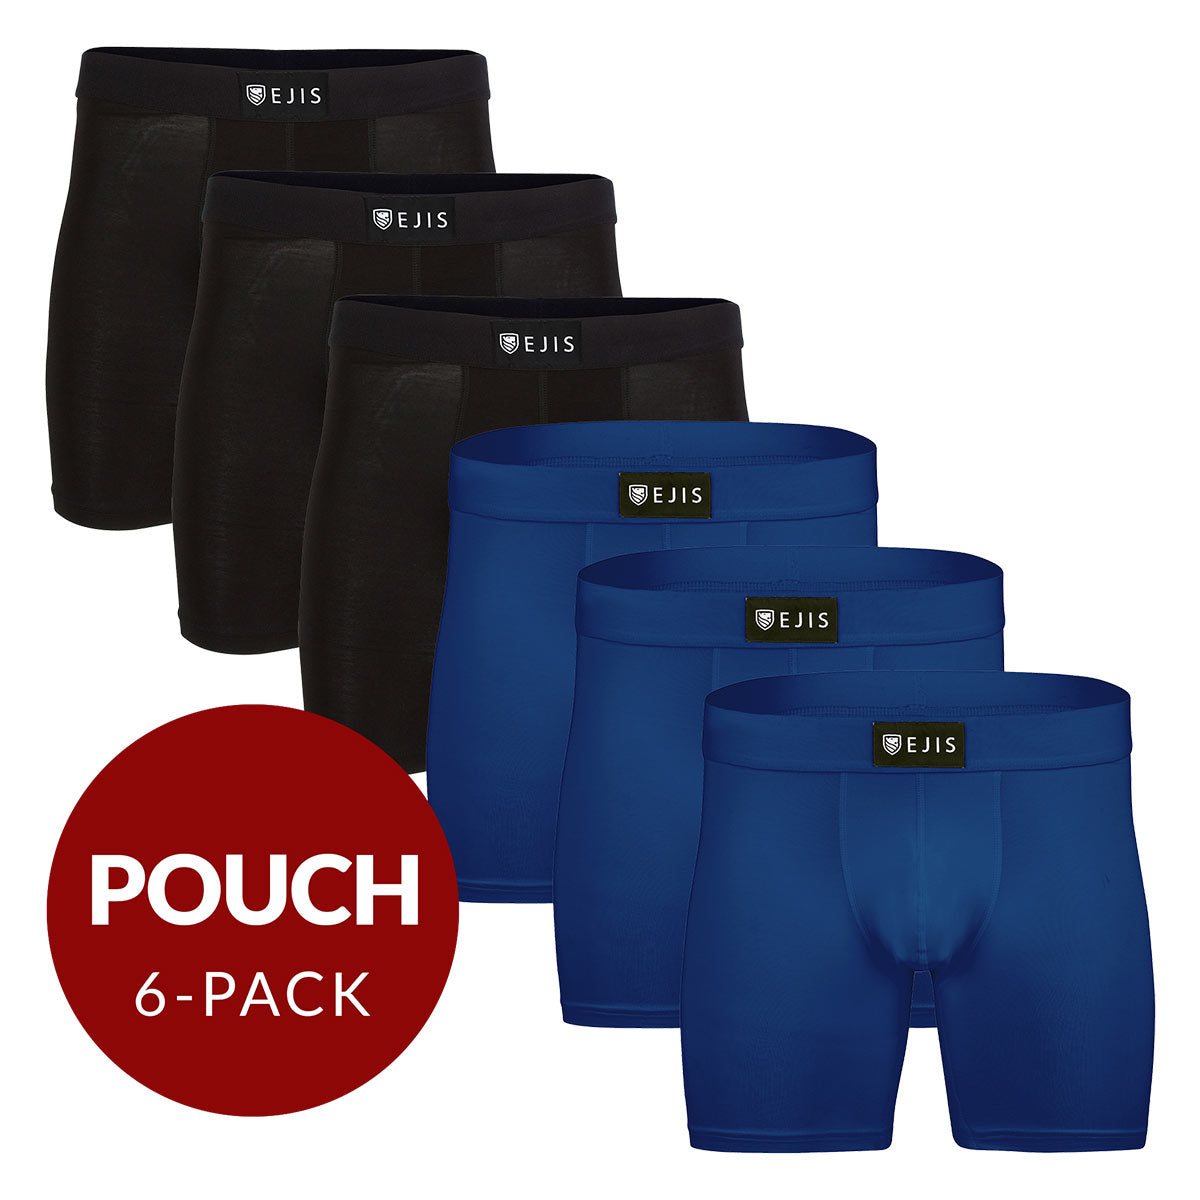 Sweat Proof Men's Boxer Briefs with Pouch - Mix 6-Pack (3x Black, Navy) - Ejis